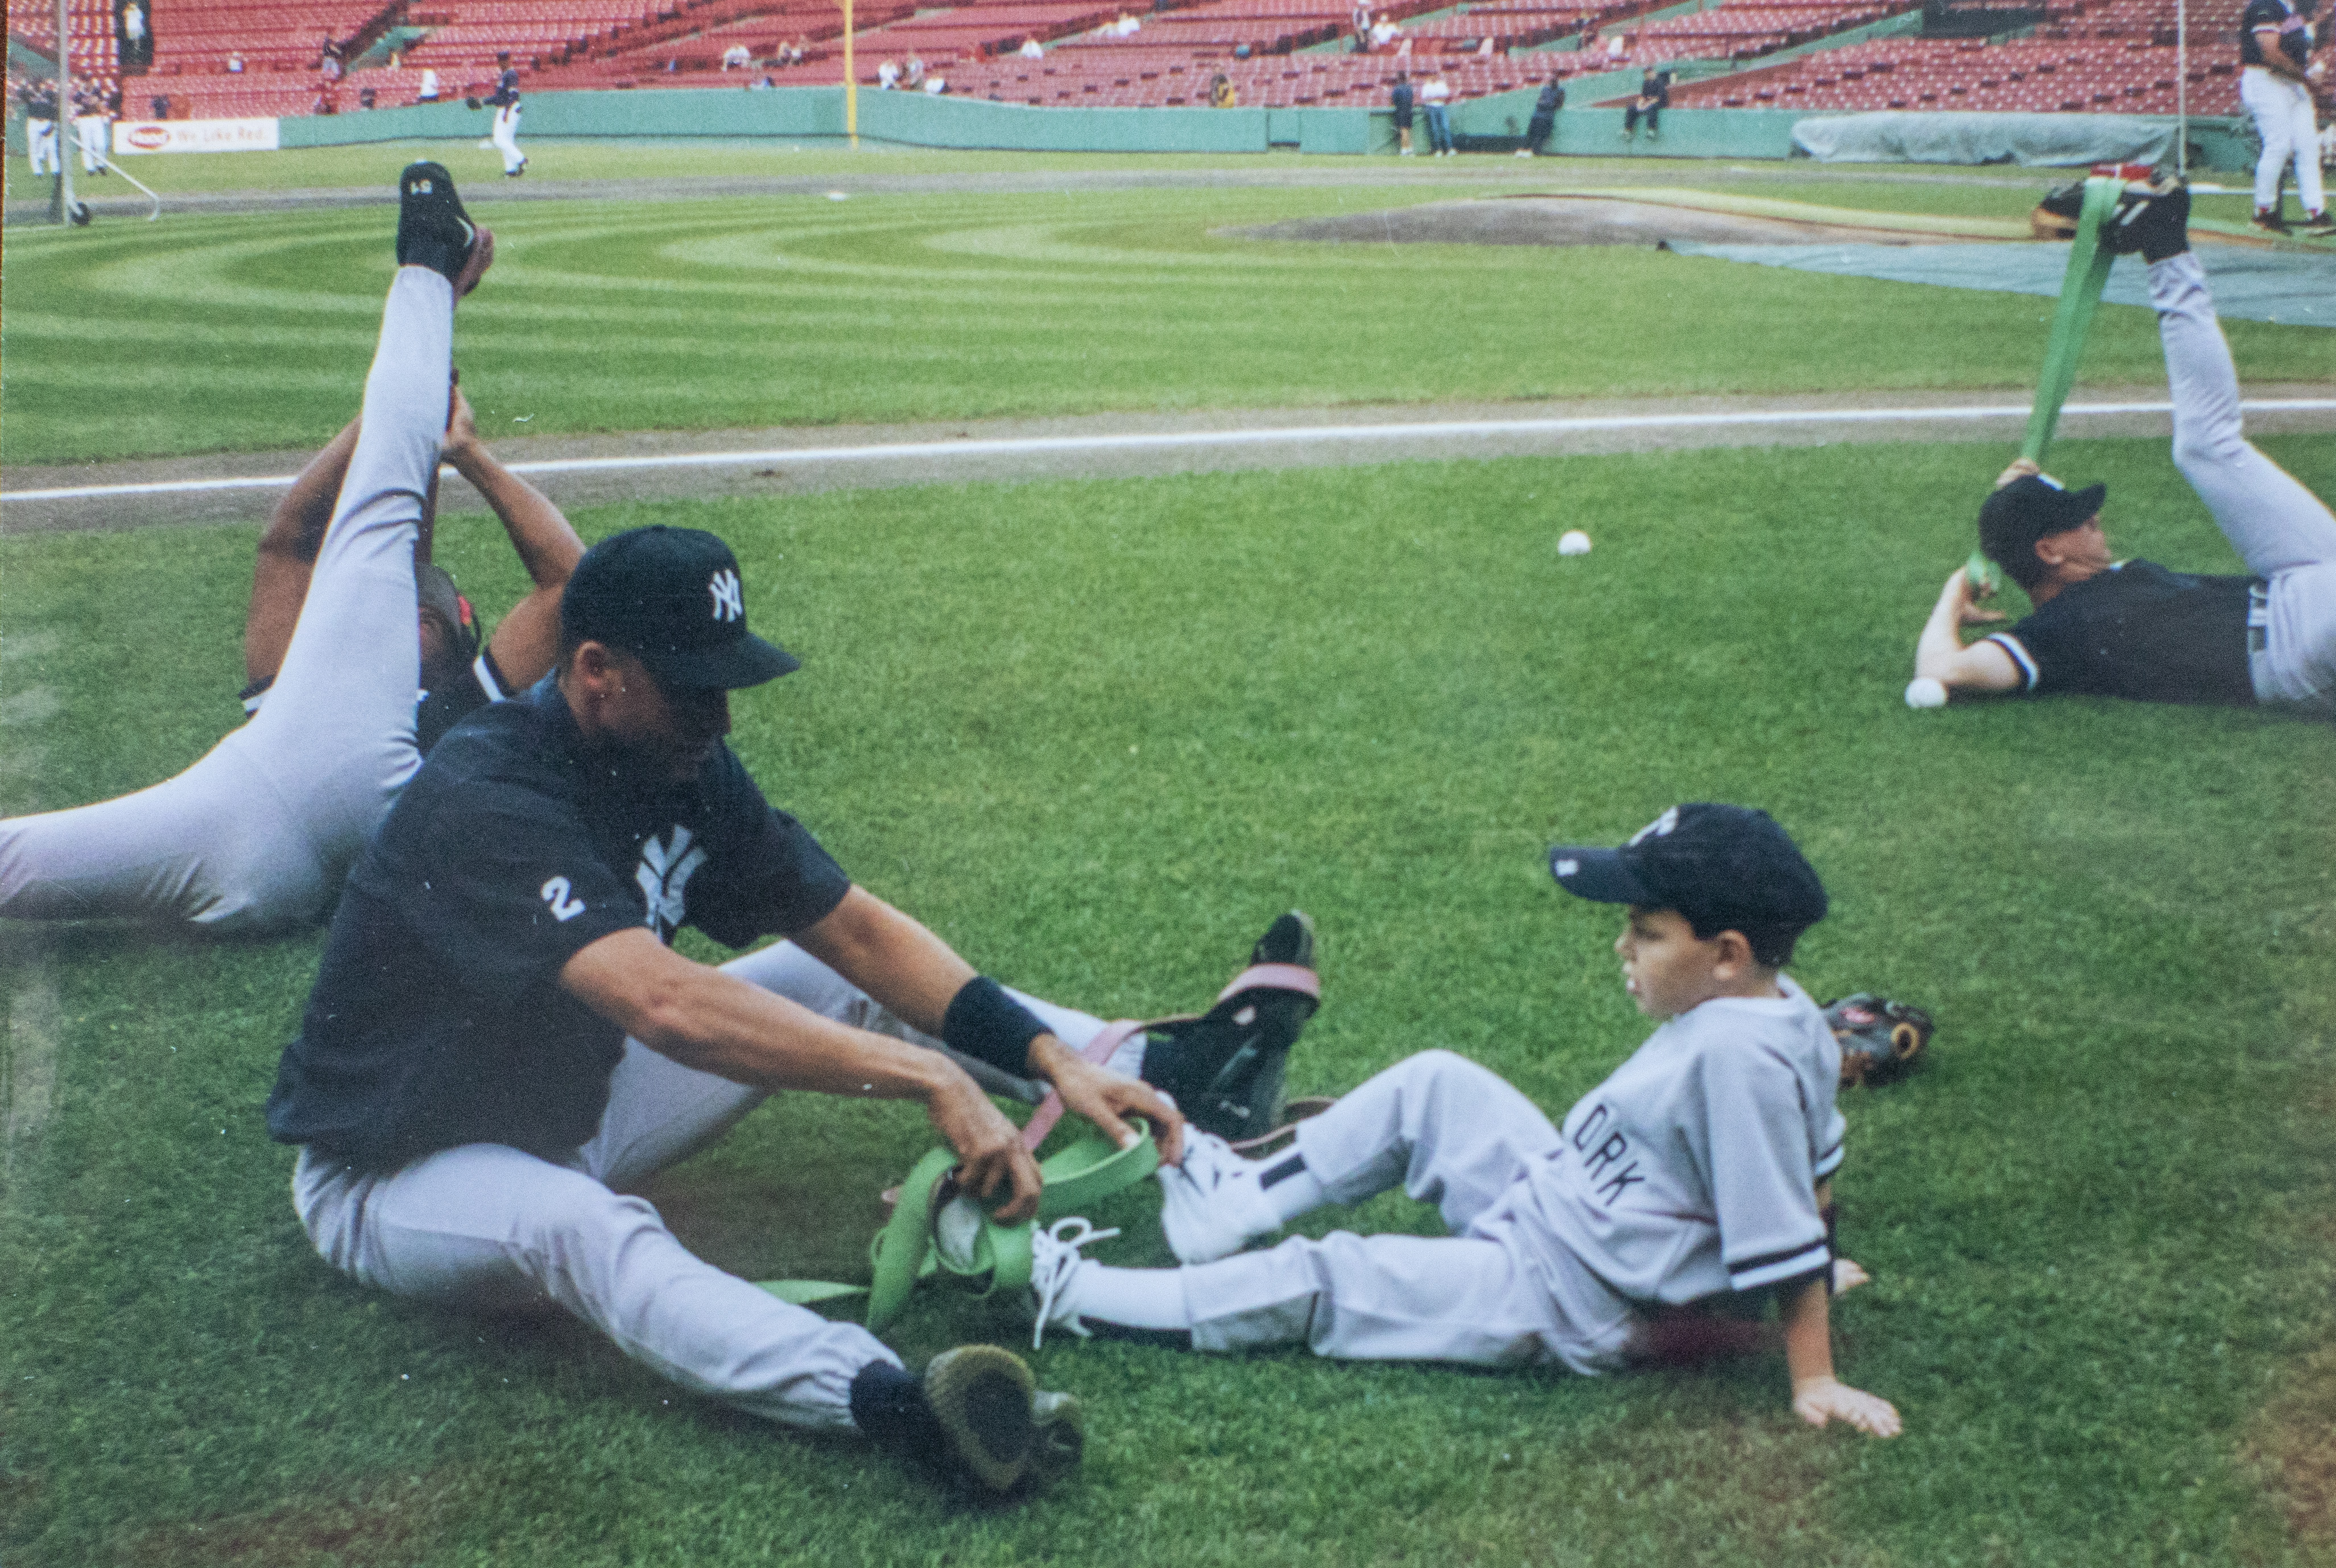 Yankees legend Derek Jeter 'was like a brother' to N.J. boy with